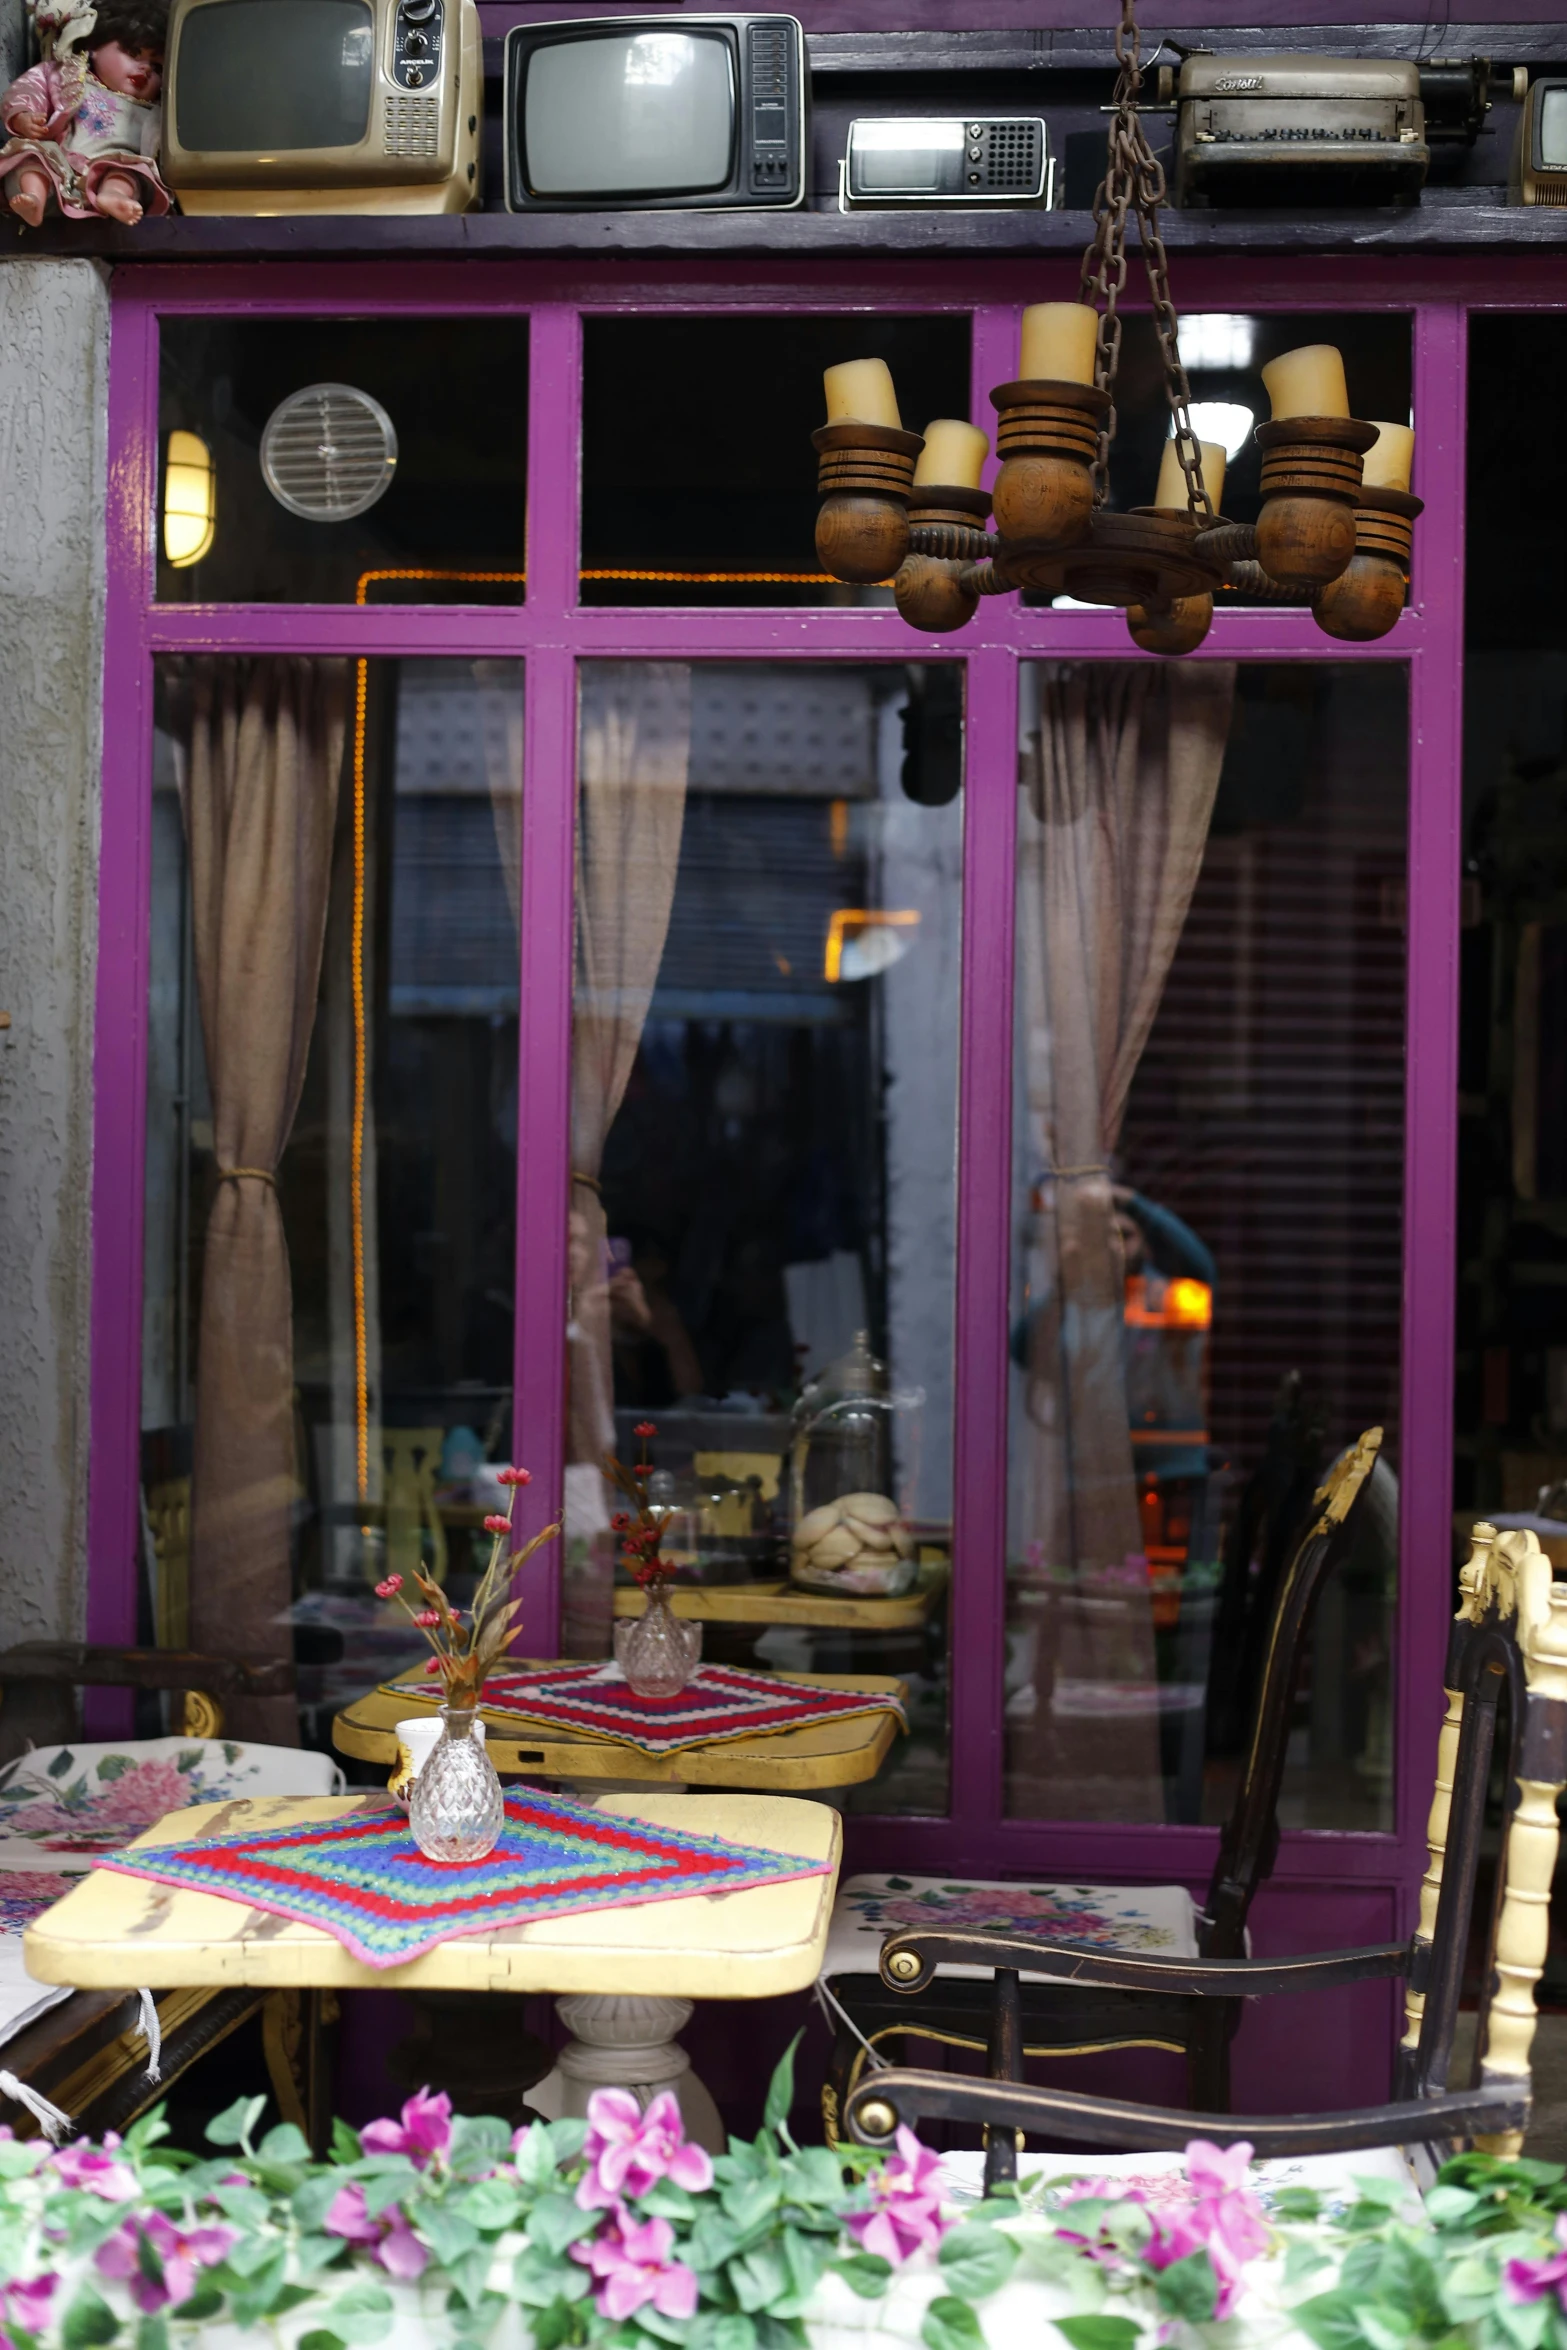 a television sitting on top of a table in front of a window, inspired by Osman Hamdi Bey, art nouveau, cafe, pink door, purple accents, medium close shot